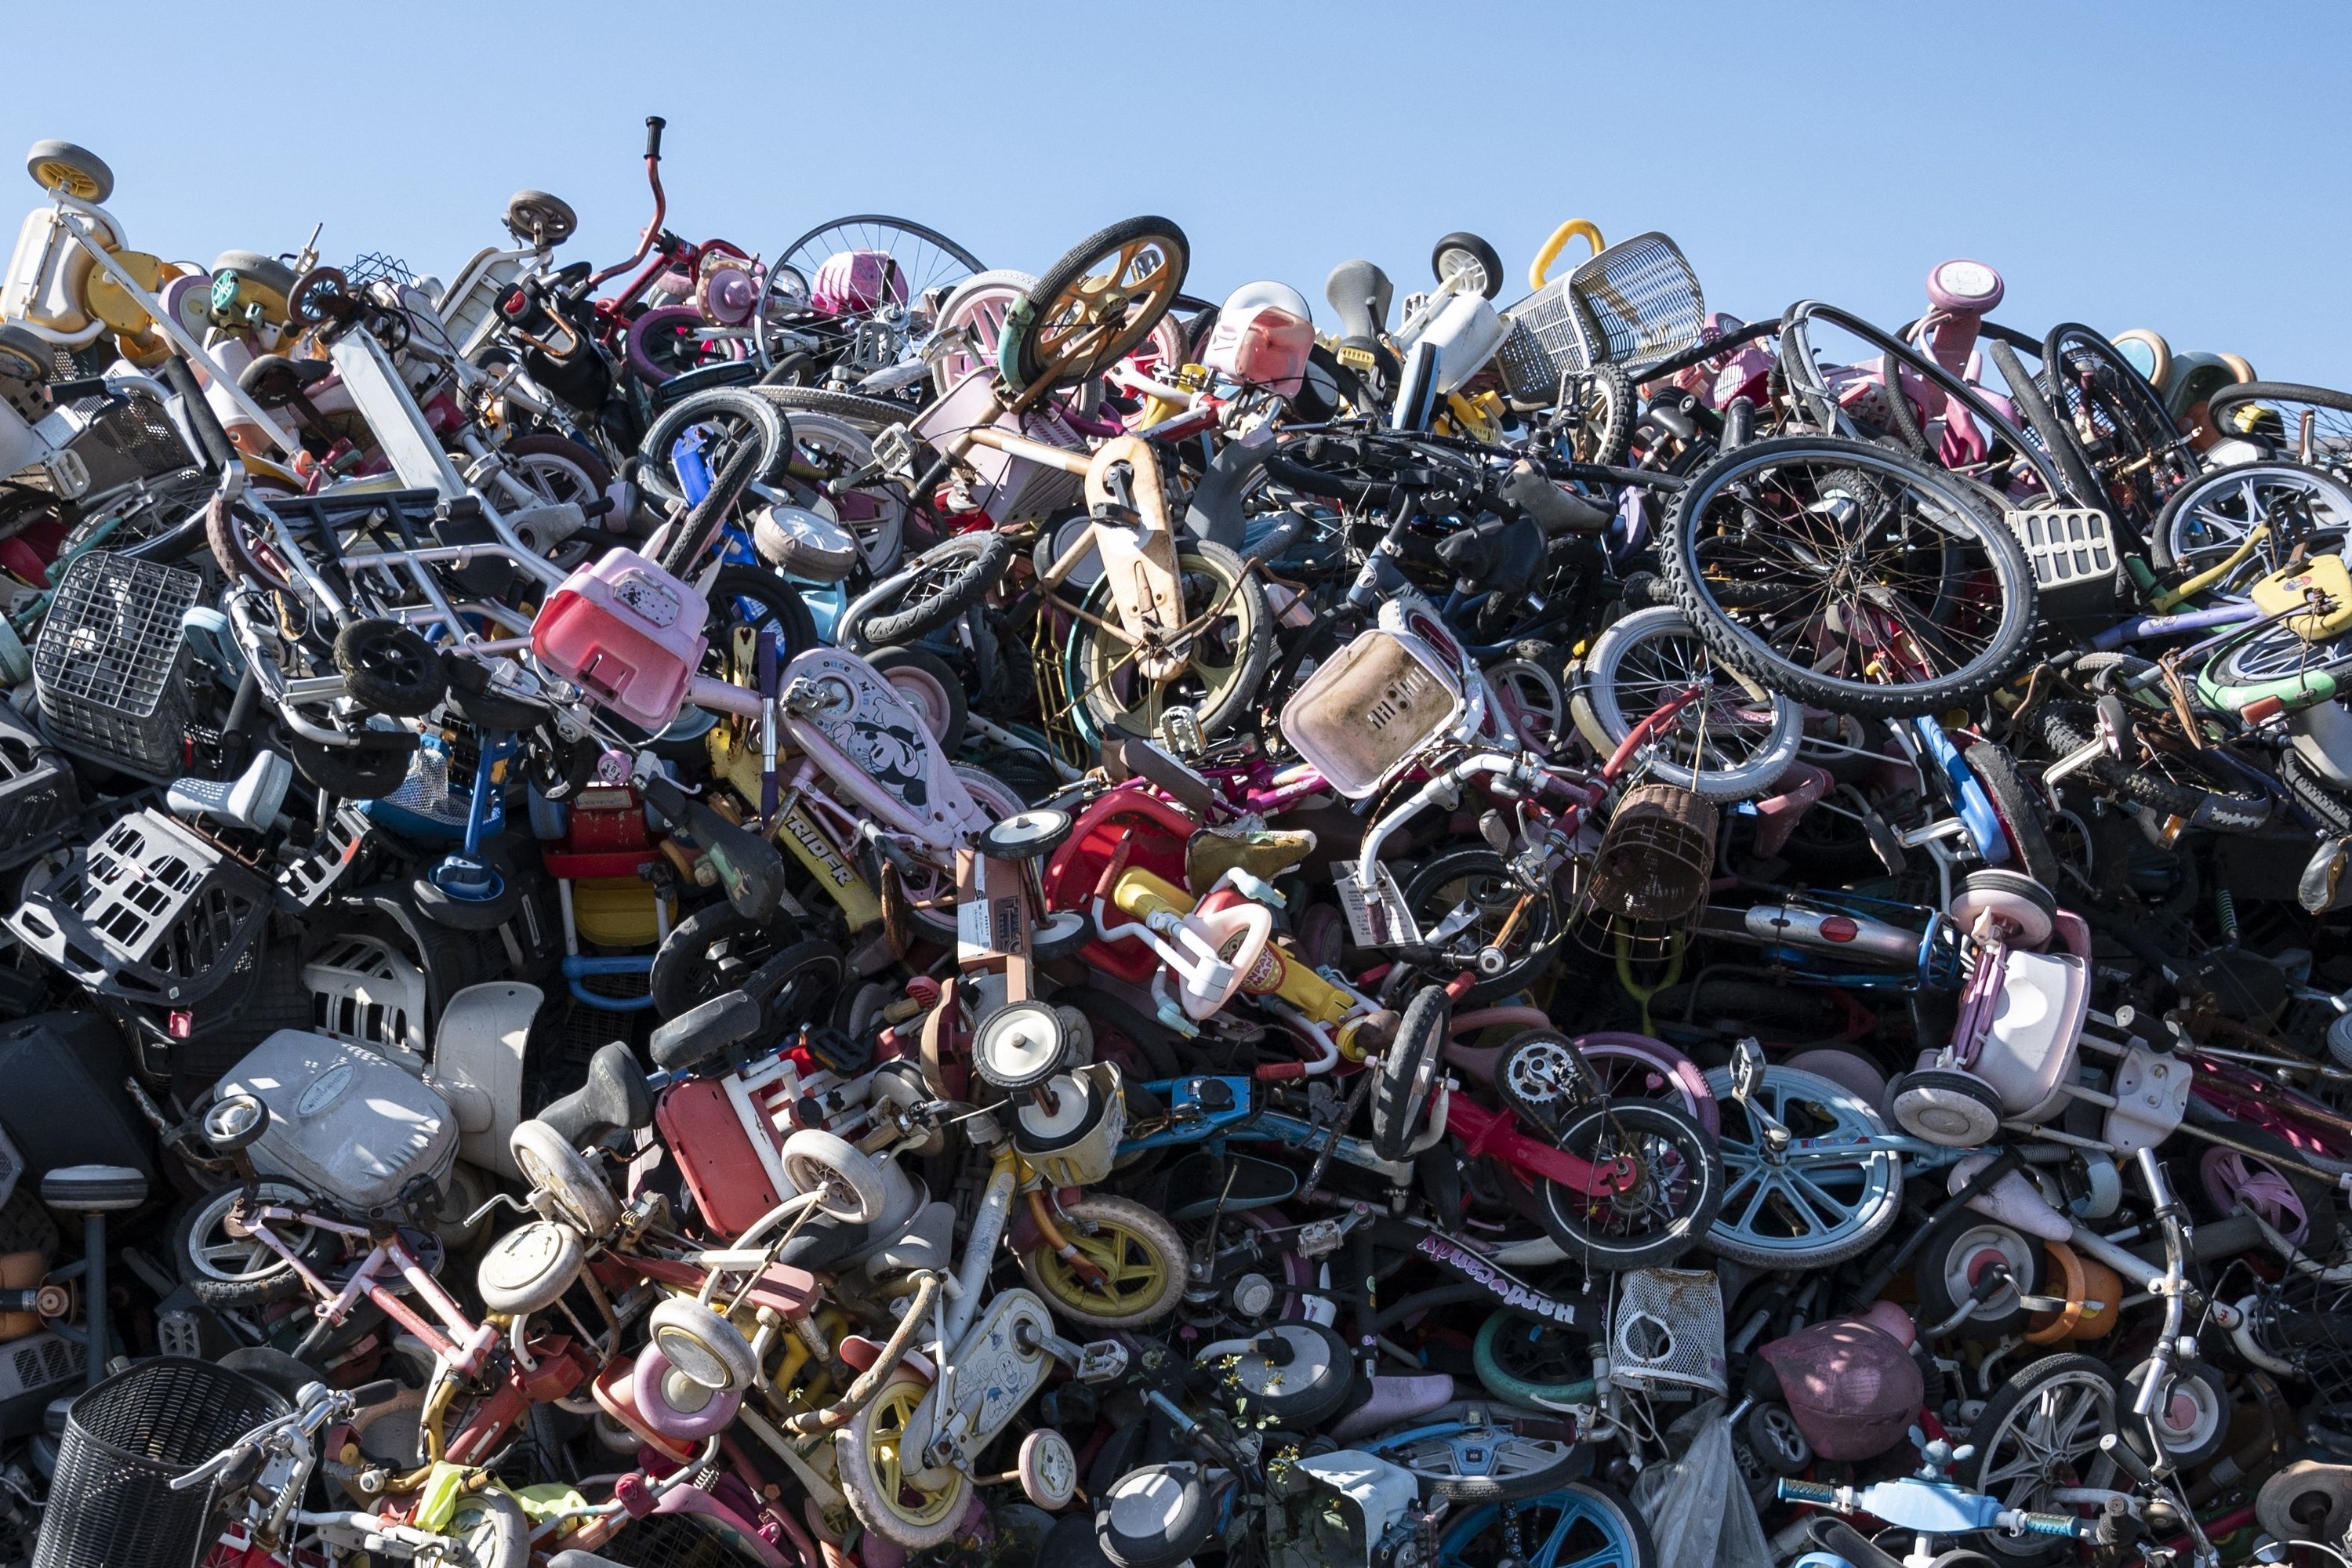 Hundreds of bikes are piled up in a heap in Japan